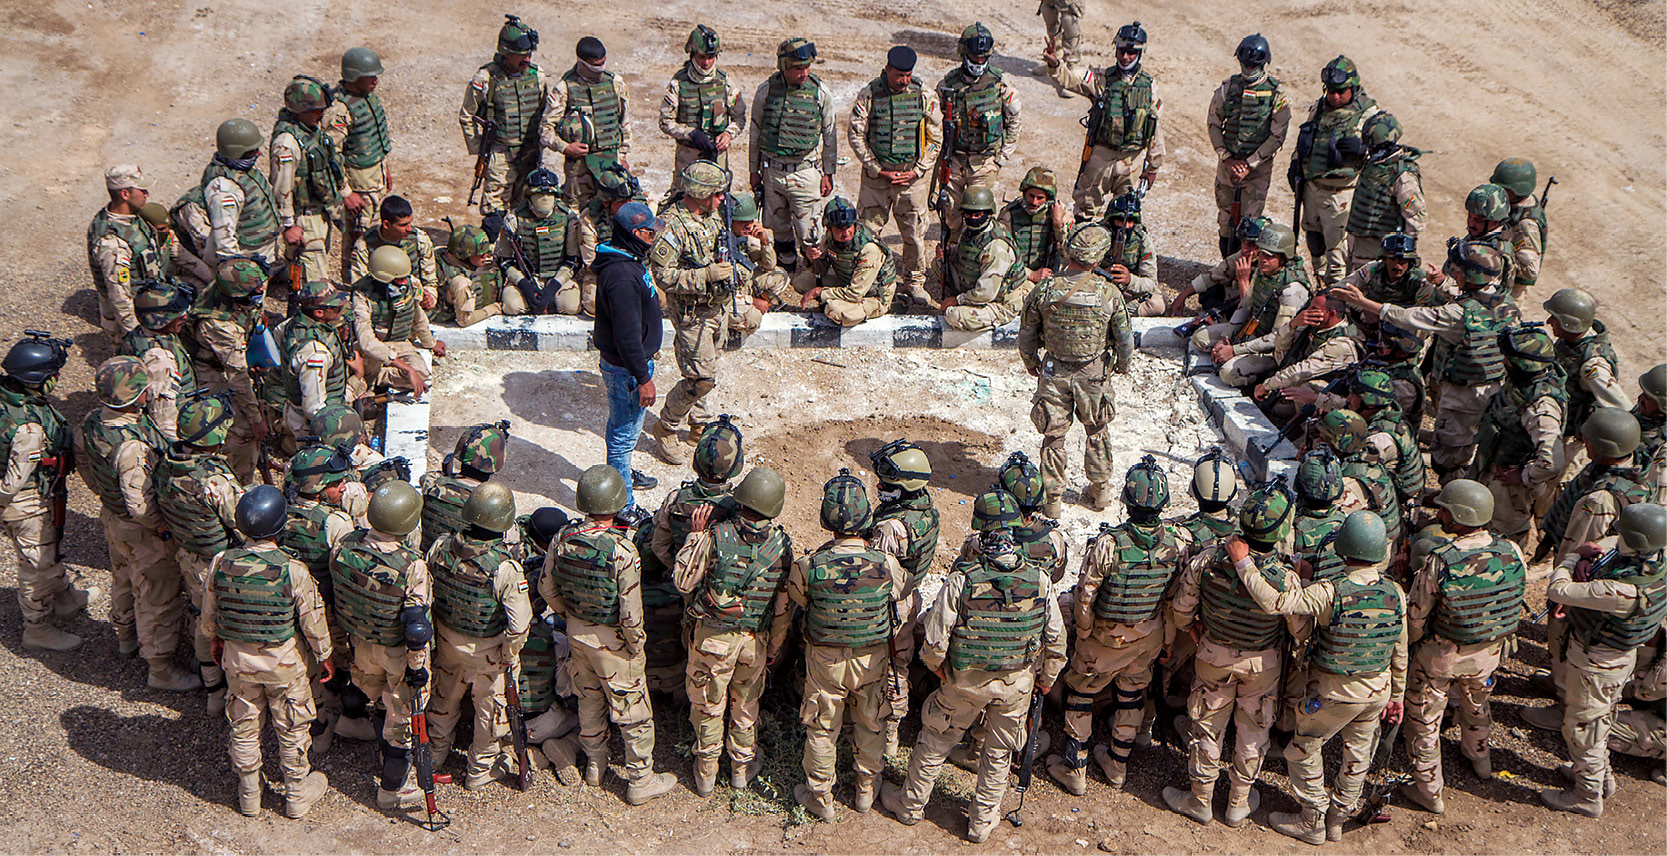 Iraqi army soldiers look on as U.S. soldiers use a sand table to demonstrate how to react to an ambush 24 March 2015 during a training exercise at a training area on Camp Taji, Iraq. (Photo by Sgt. Cody Quinn, U.S. Army)